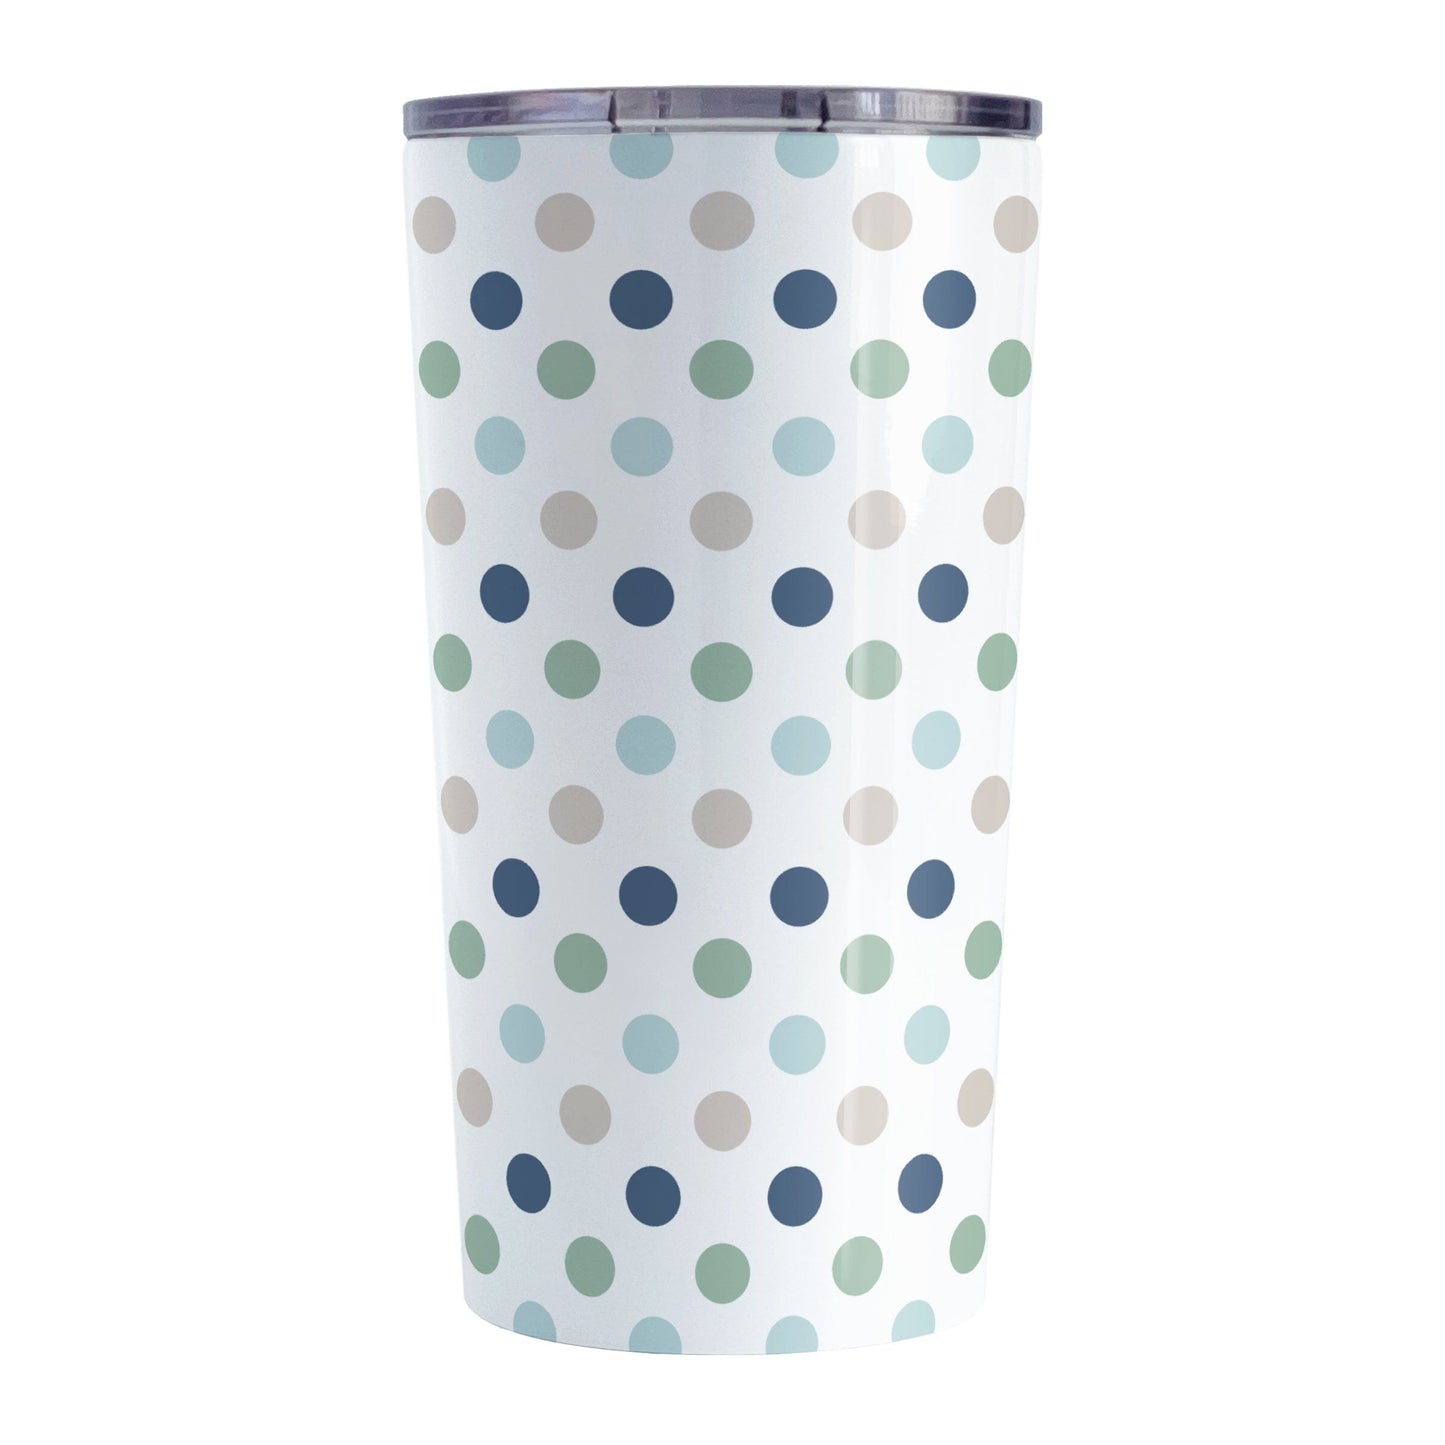 Coastal Polka Dots Tumbler Cup (20oz) at Amy's Coffee Mugs. A stainless steel tumbler cup designed with a pattern of polka dots in a coastal color scheme that wraps around the cup. 